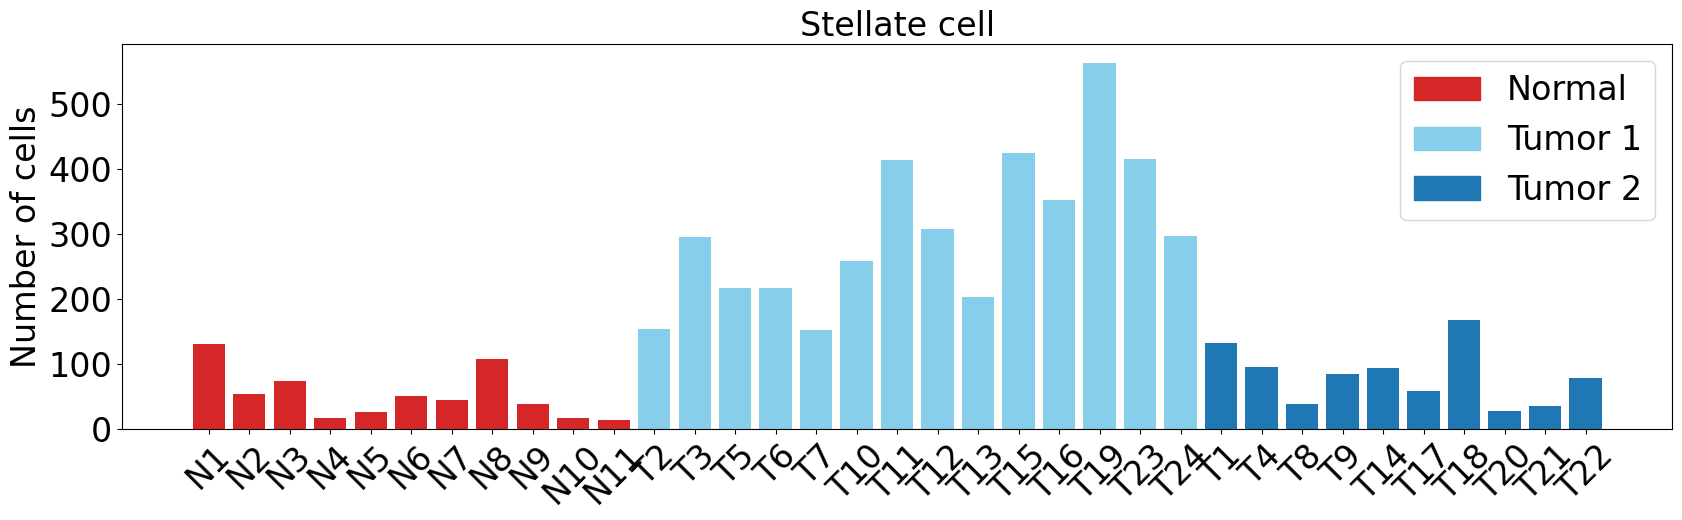 Stellate_cell1.png